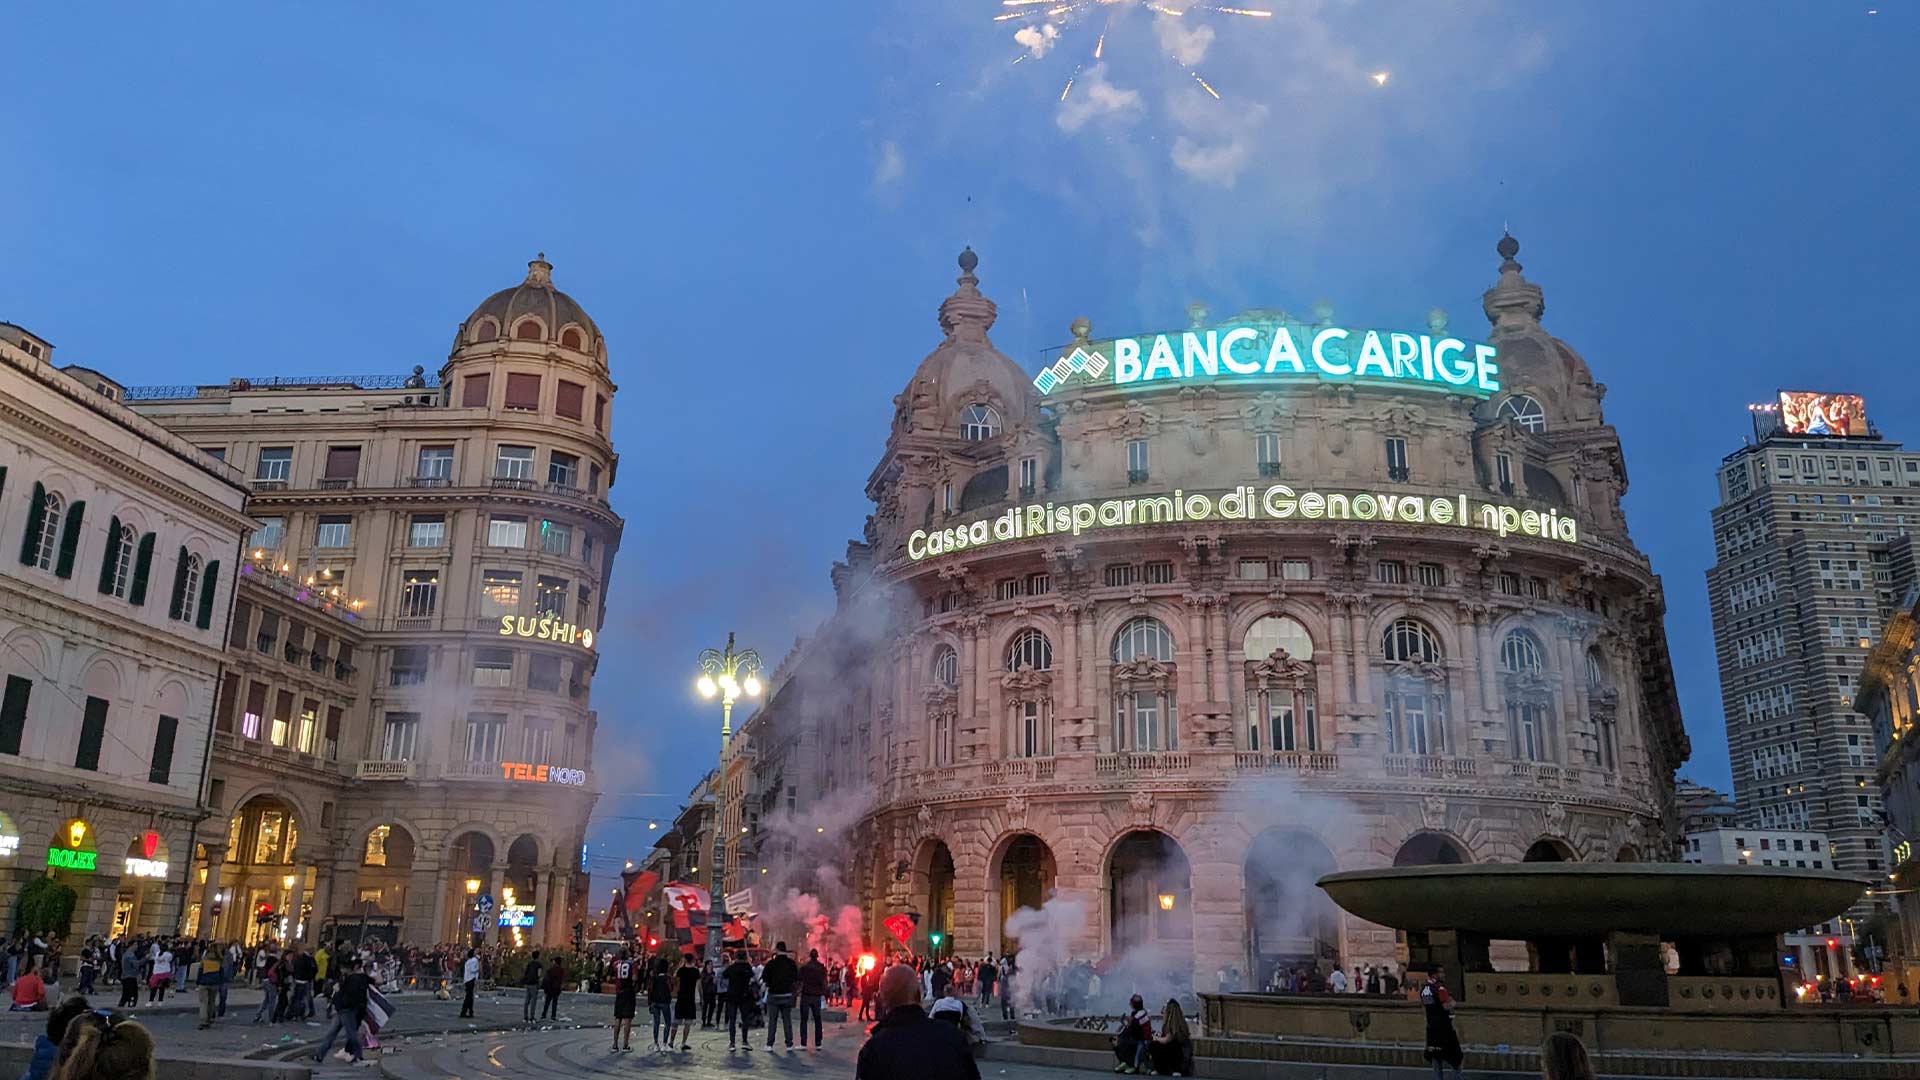 A photo of a town squad in Genoa, with smoke from flares filling the air and fireworks in the sky